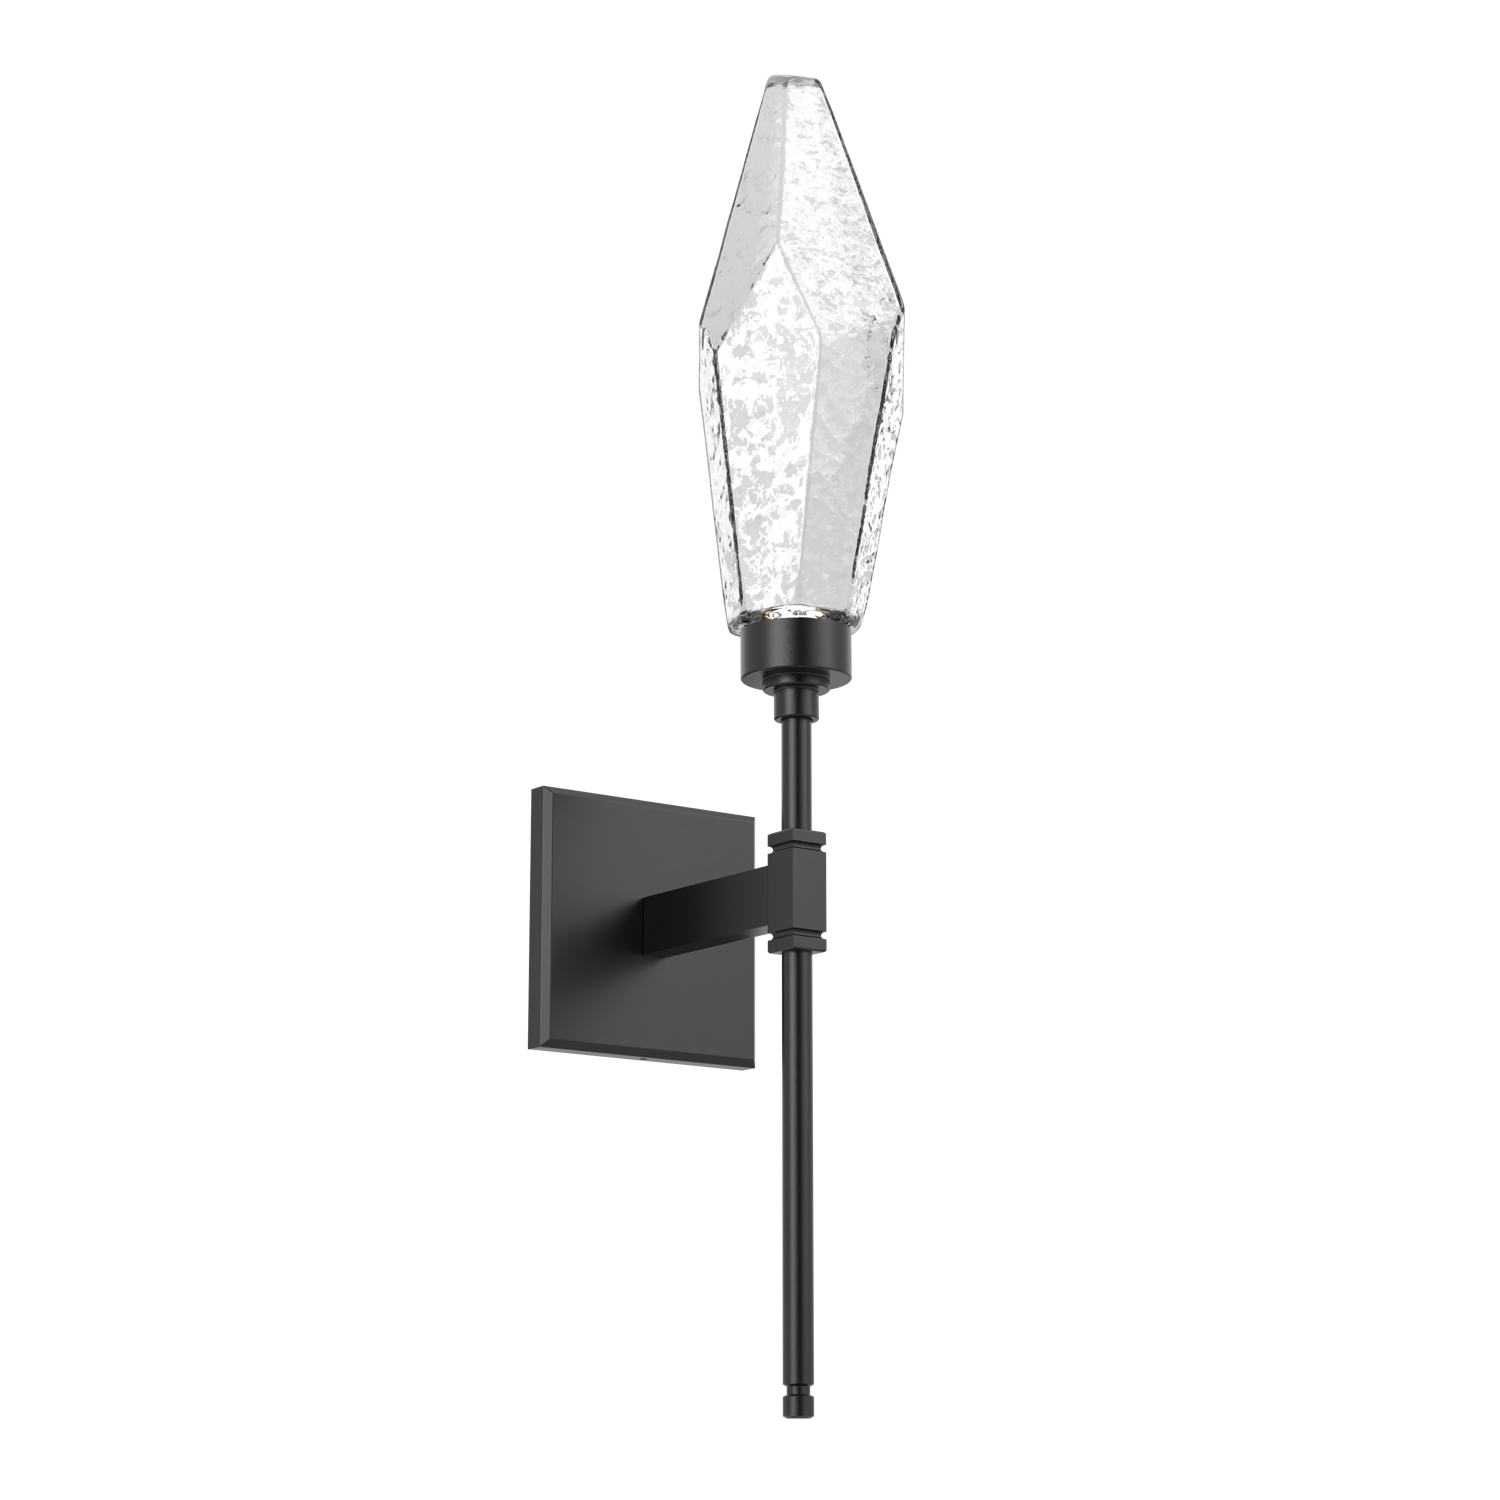 IDB0050-07-MB-CC-Hammerton-Studio-Rock-Crystal-belvedere-wall-sconce-with-matte-black-finish-and-clear-glass-shades-and-LED-lamping